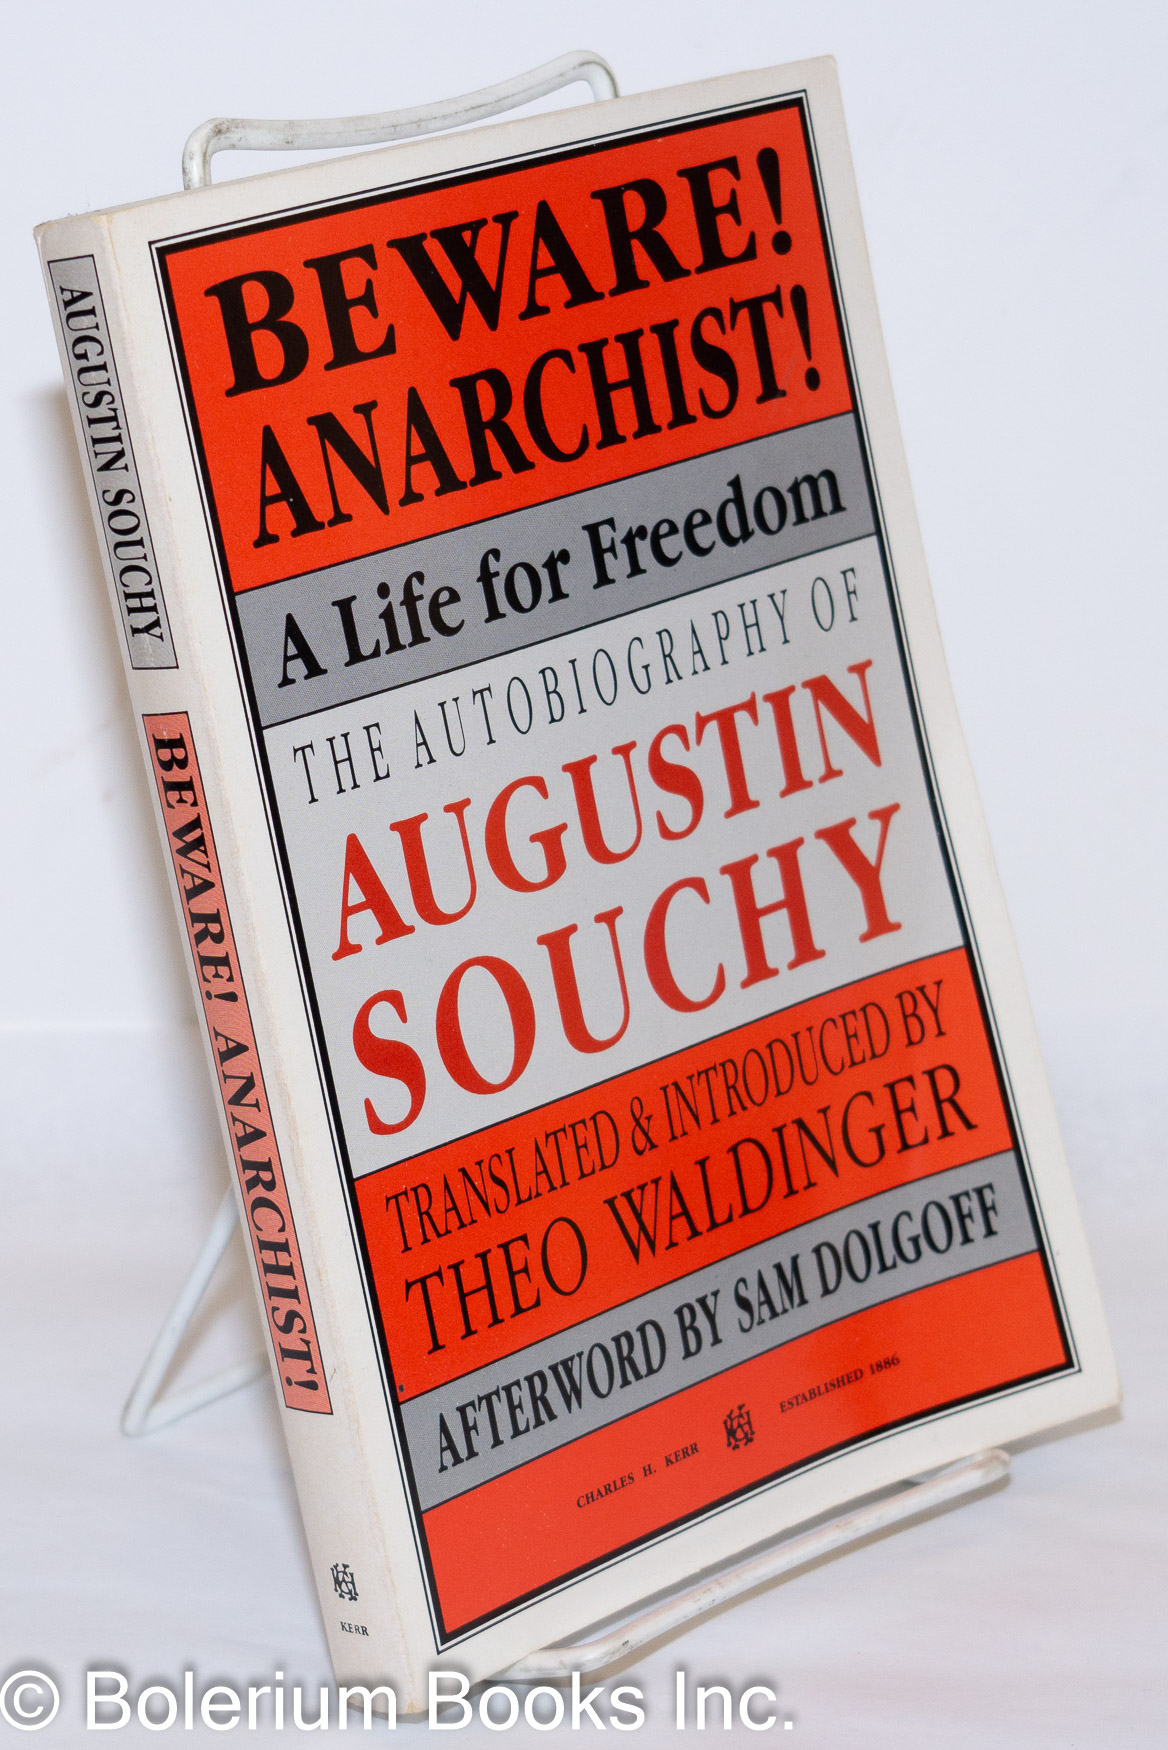 Beware! Anarchist! A life for freedom, an autobiography. Translated & introduced by Theo Waldinger, edited by Sam Dolgoff & Richard Ellington with an afterword by Sam Dolgoff - Souchy, Augustin